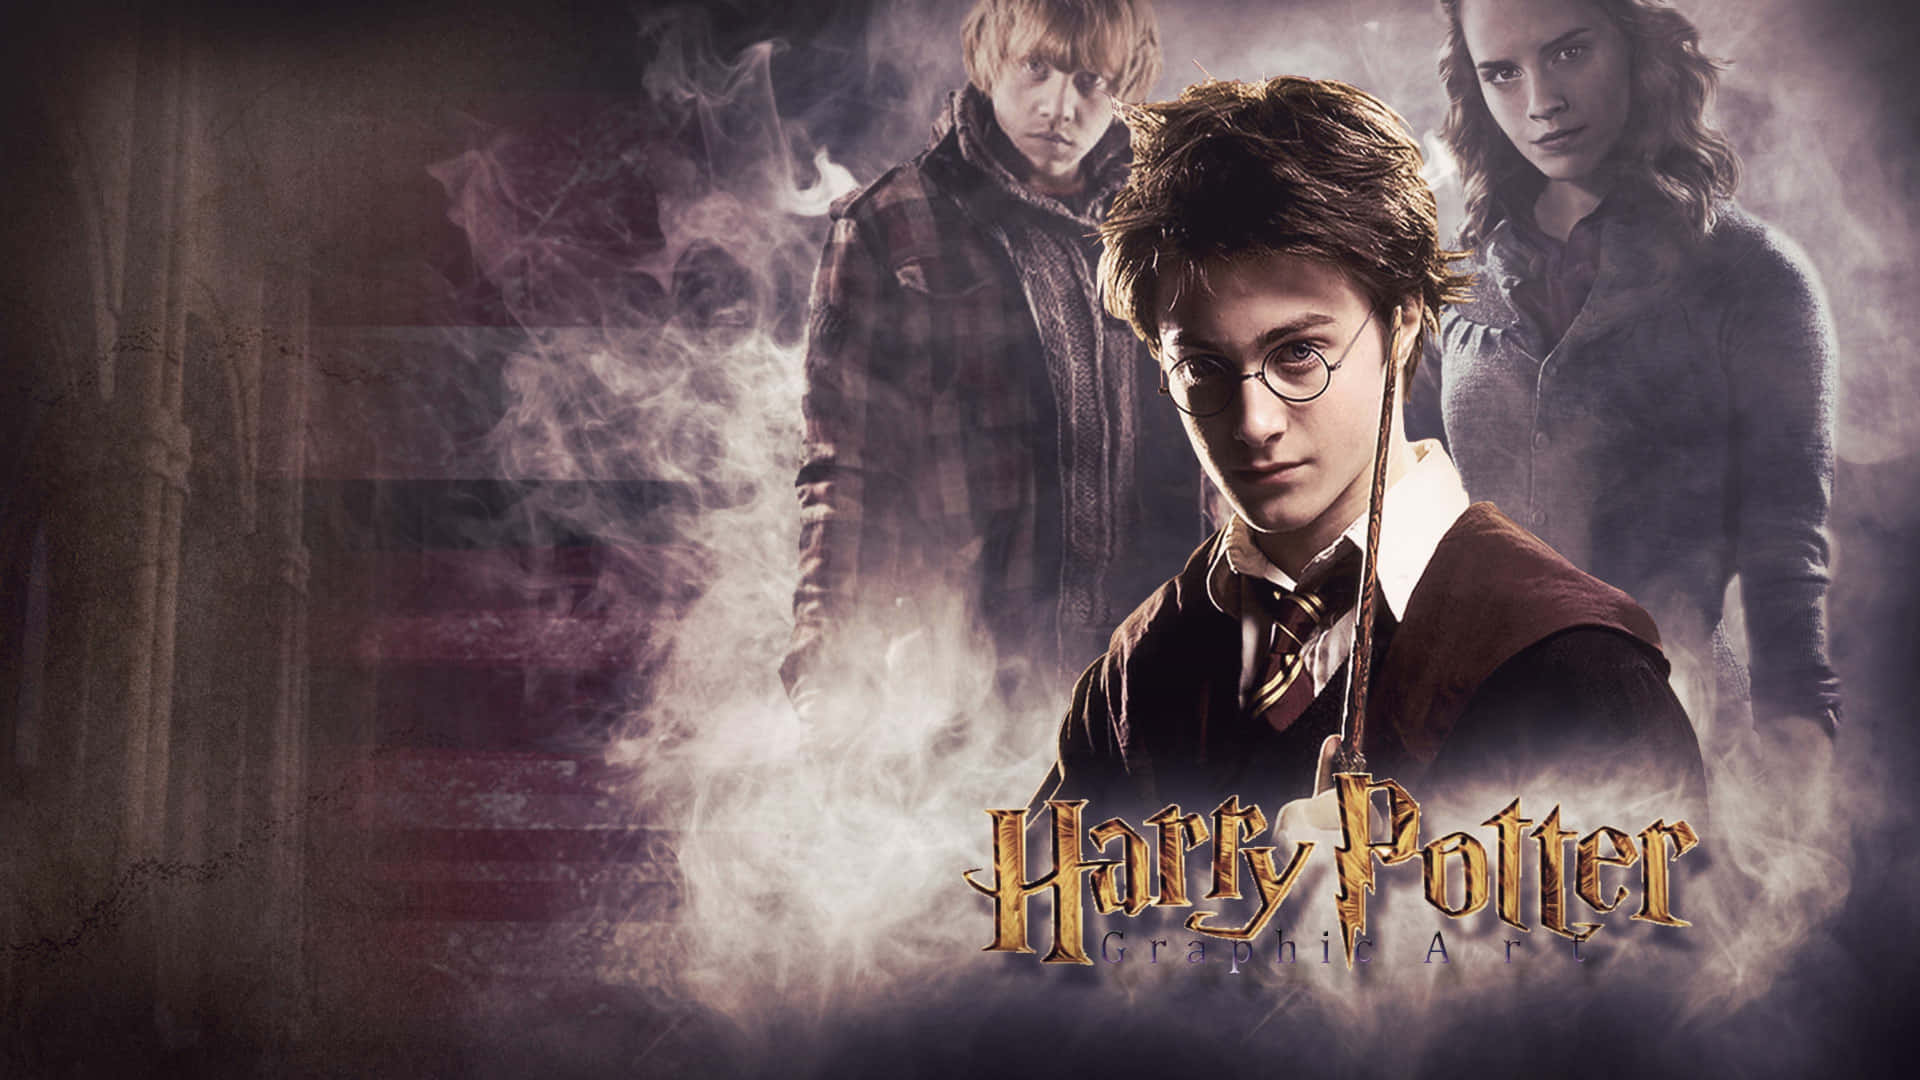 Immerse yourself in the magical world of Harry Potter with this stunning 4k wallpaper Wallpaper